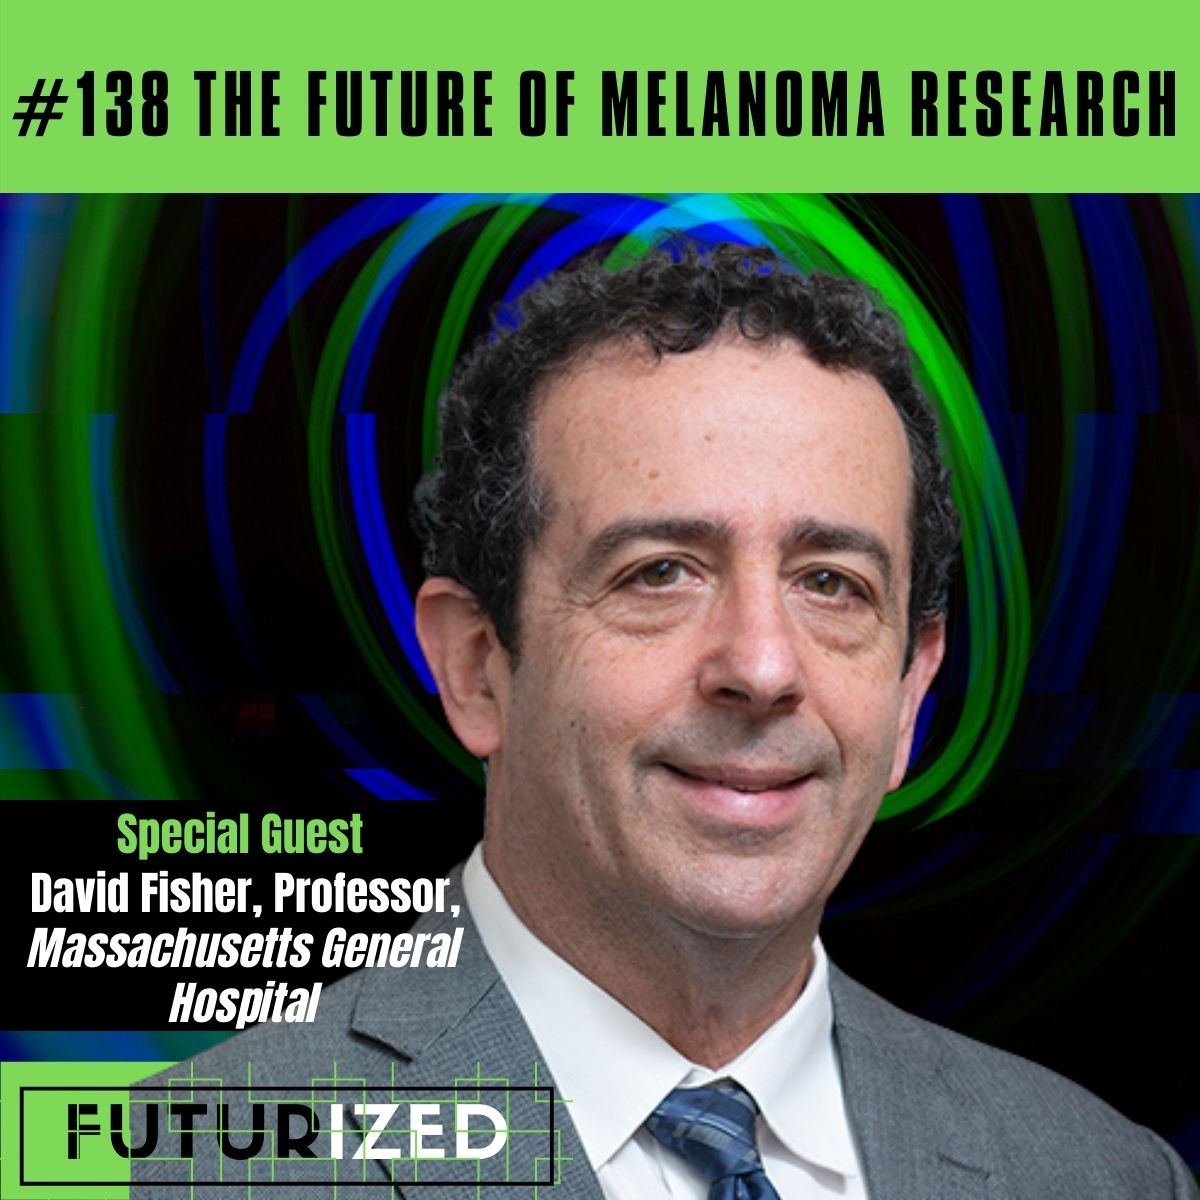 The Future of Melanoma Research Image